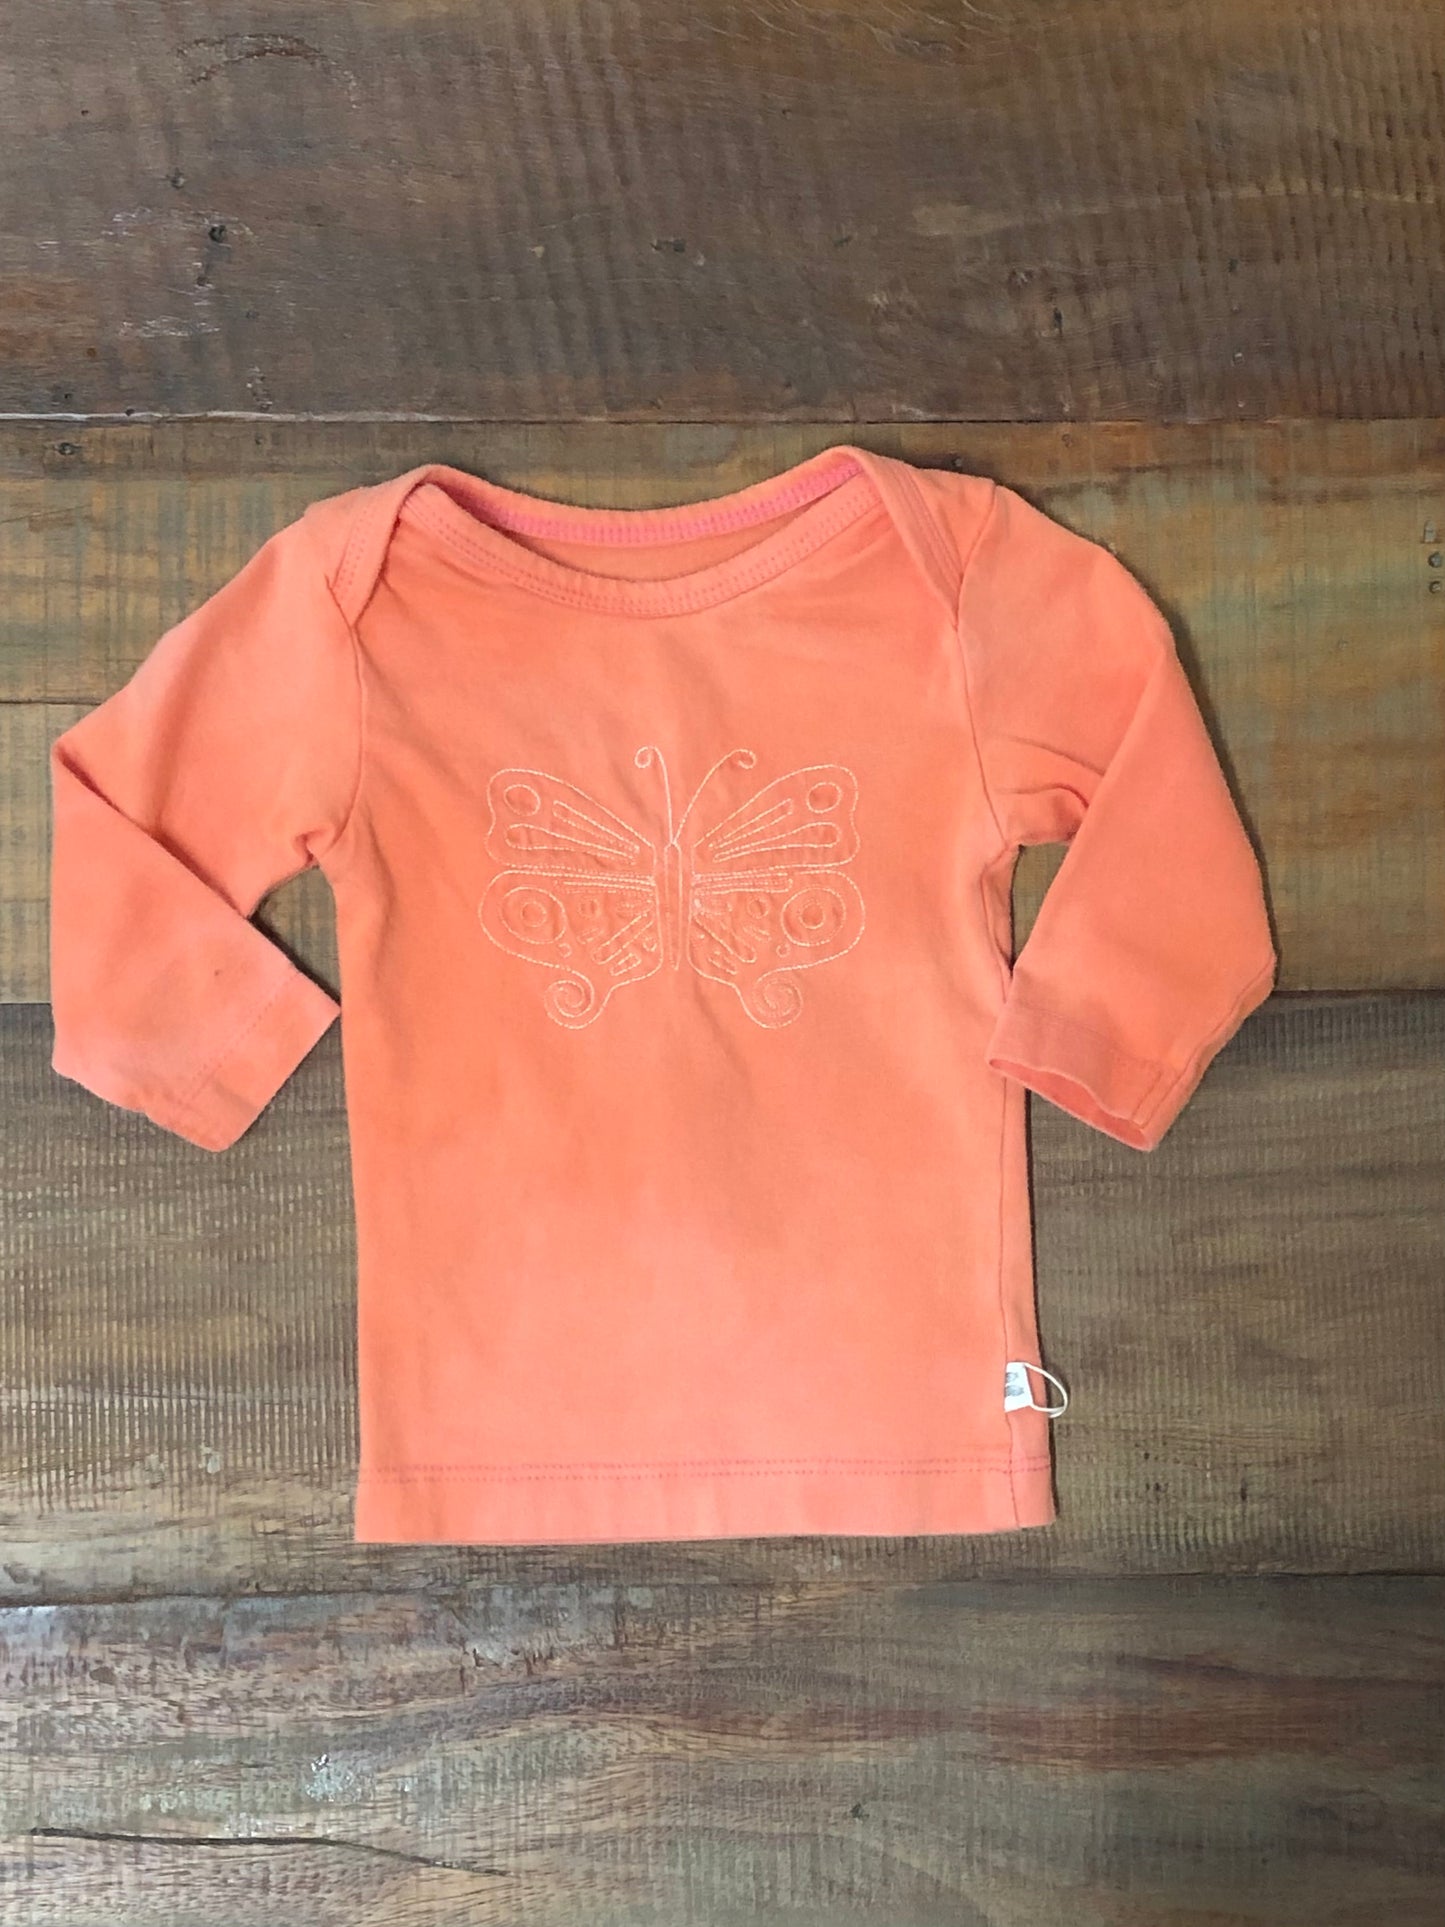 Embroidered Butterfly Baby Tee